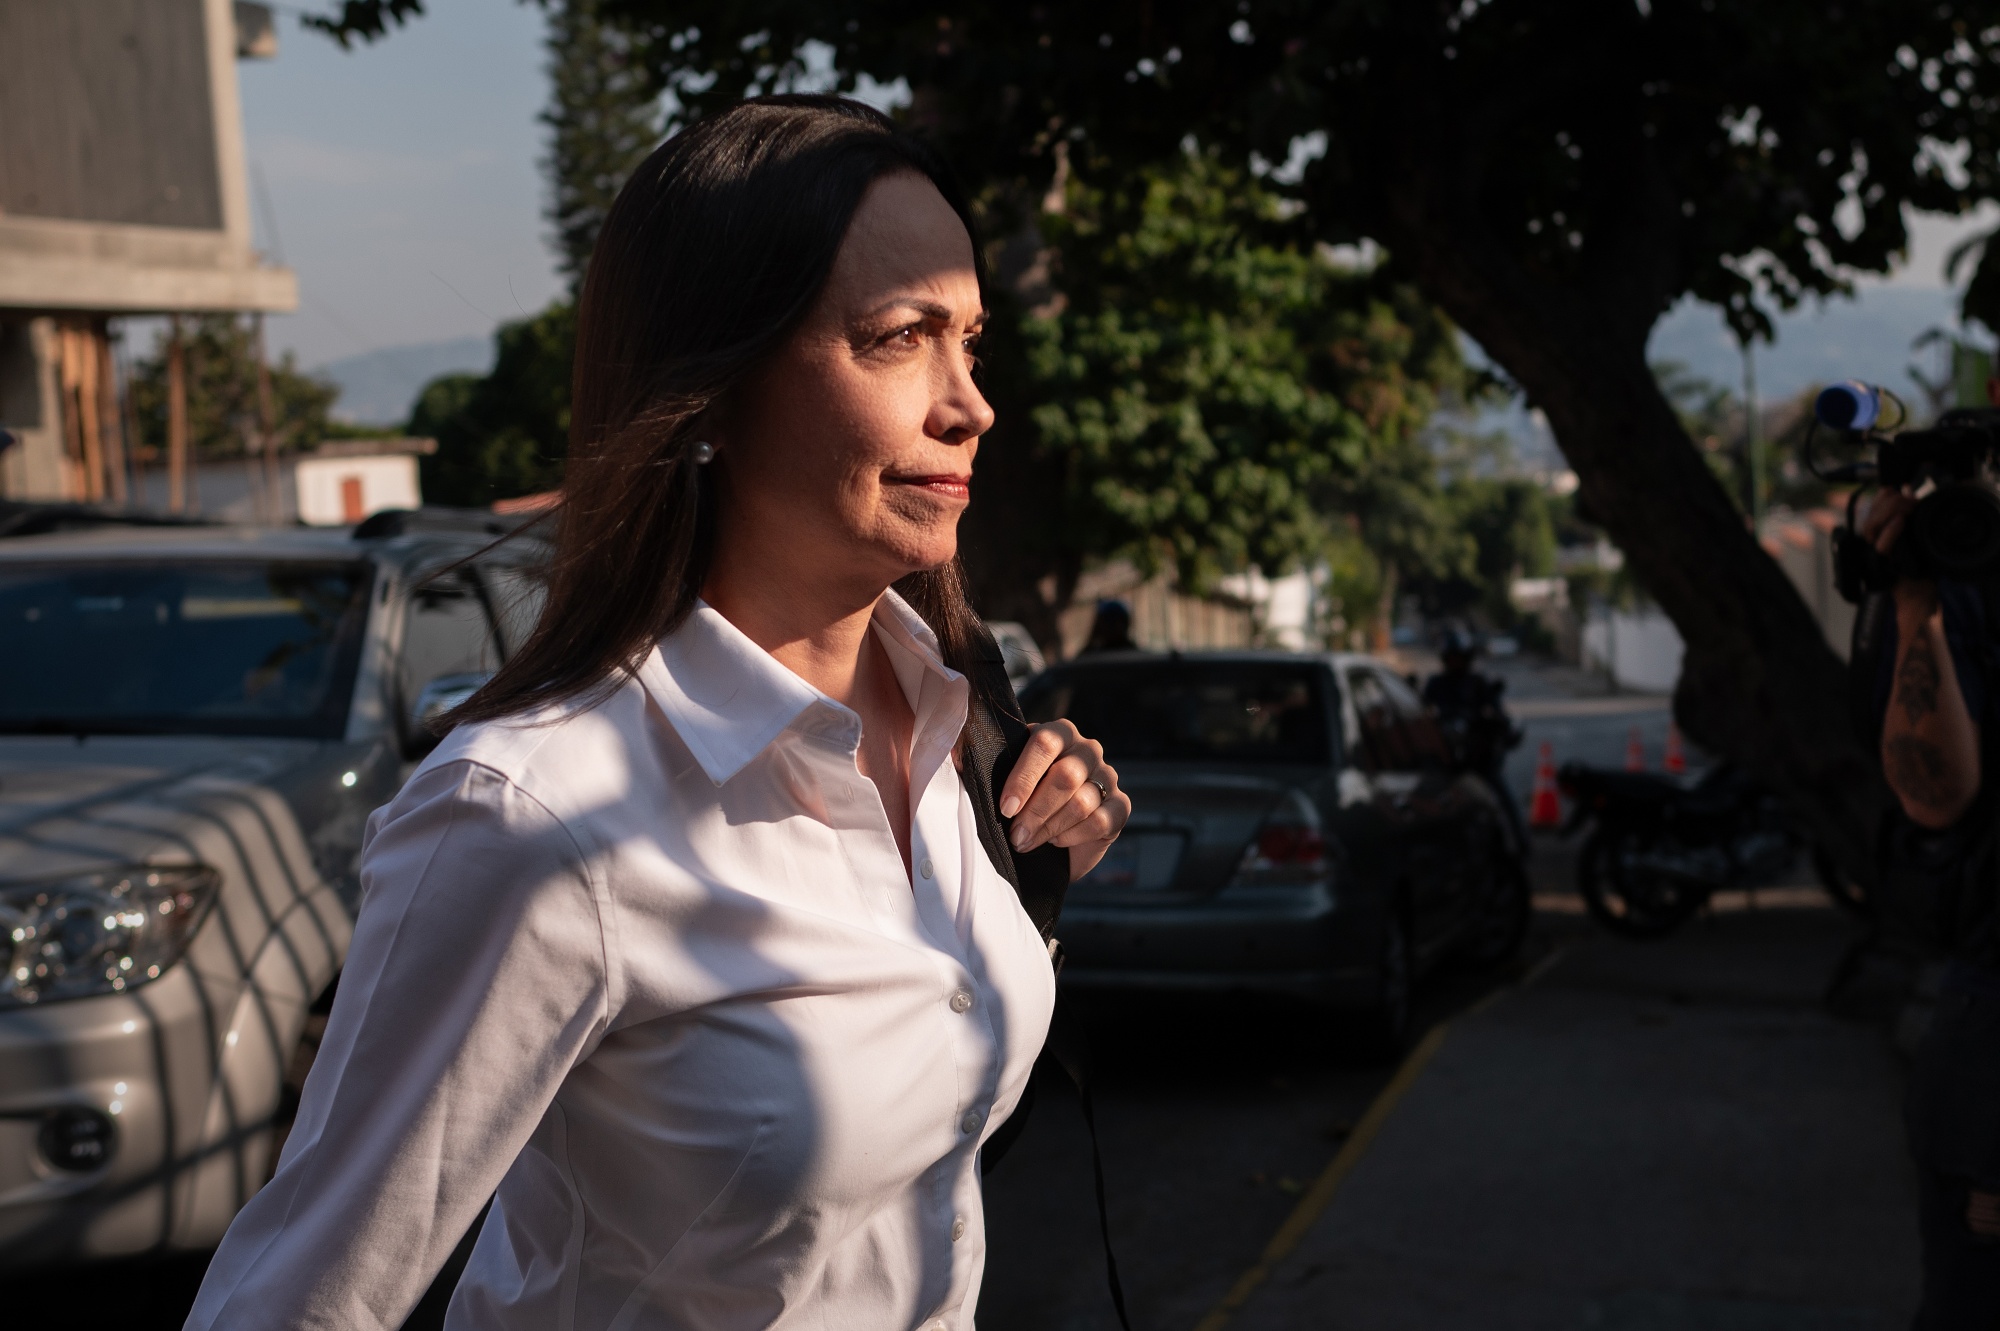 Maria Corina Machado arrives for a press conference in Caracas on March 20.